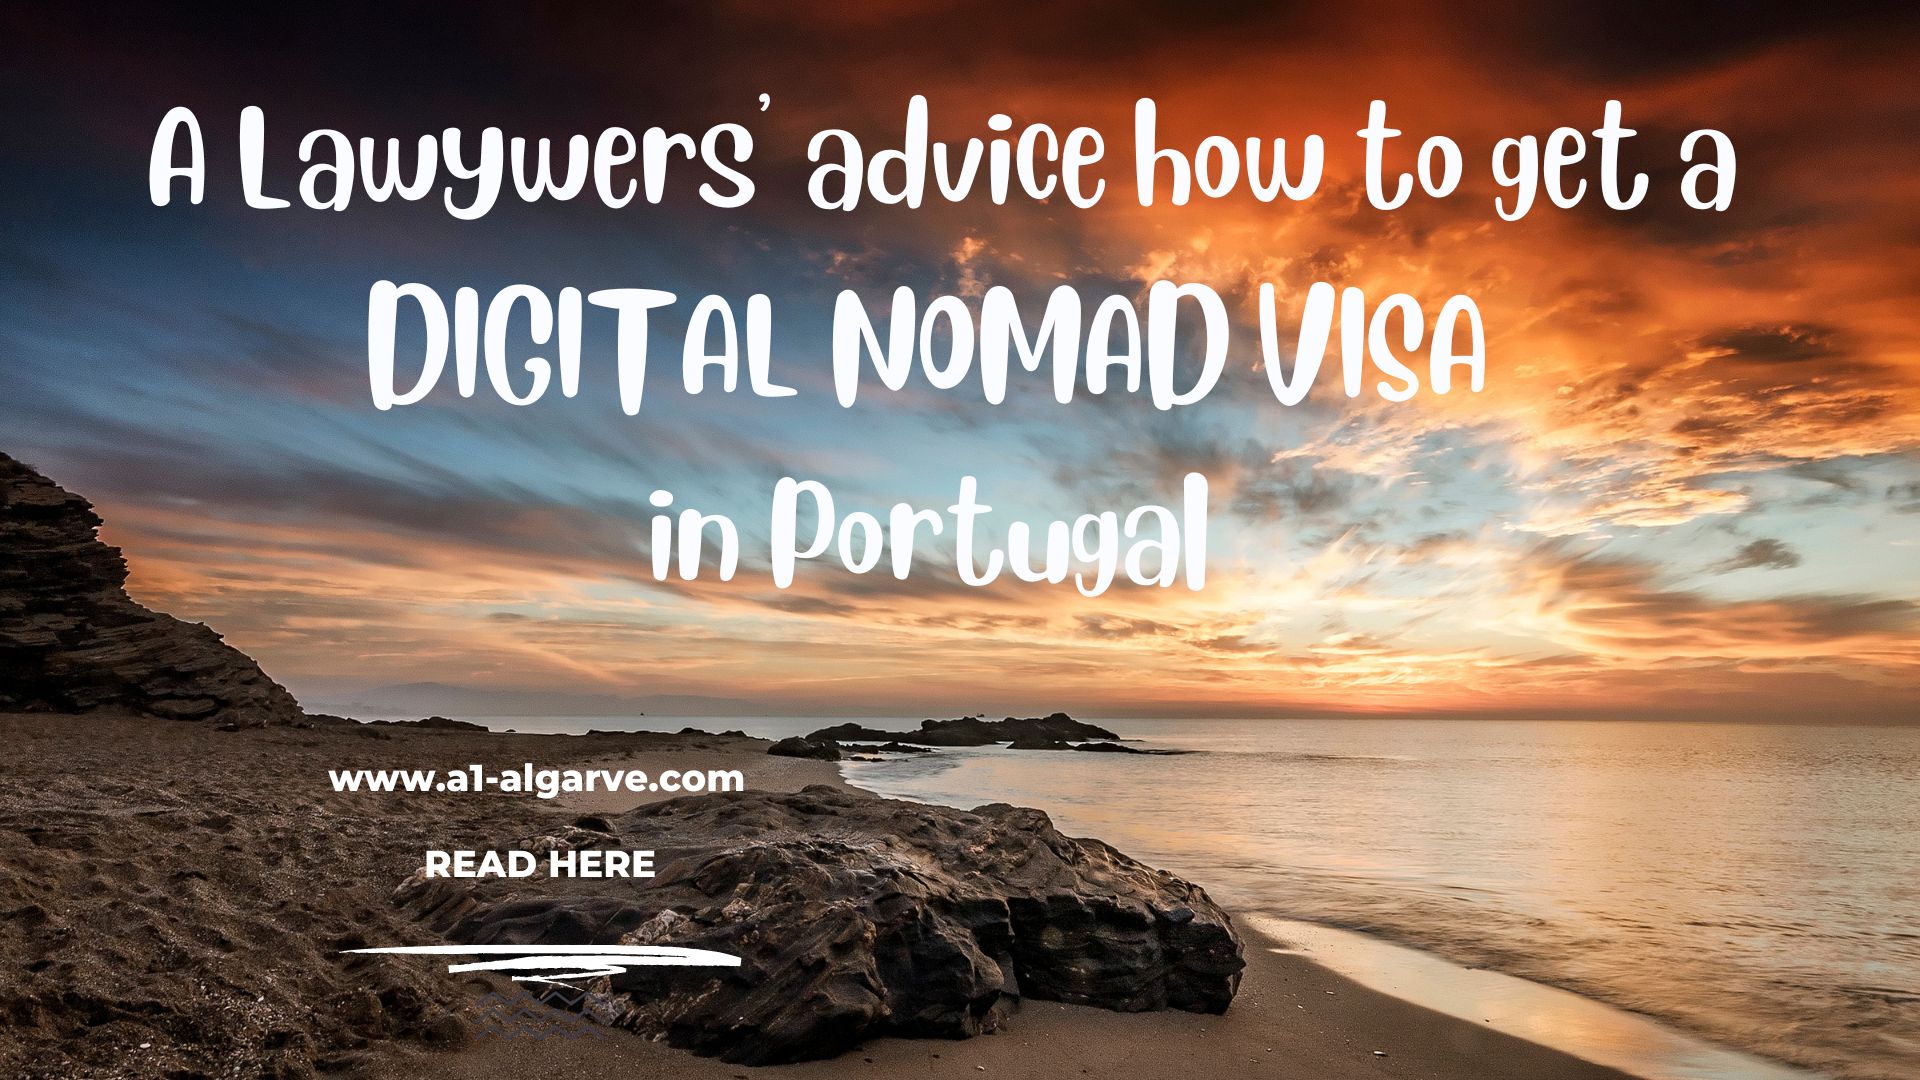 A LAWYERS’ ADVICE HOW TO GET A DIGITAL NOMAD VISA IN PORTUGAL